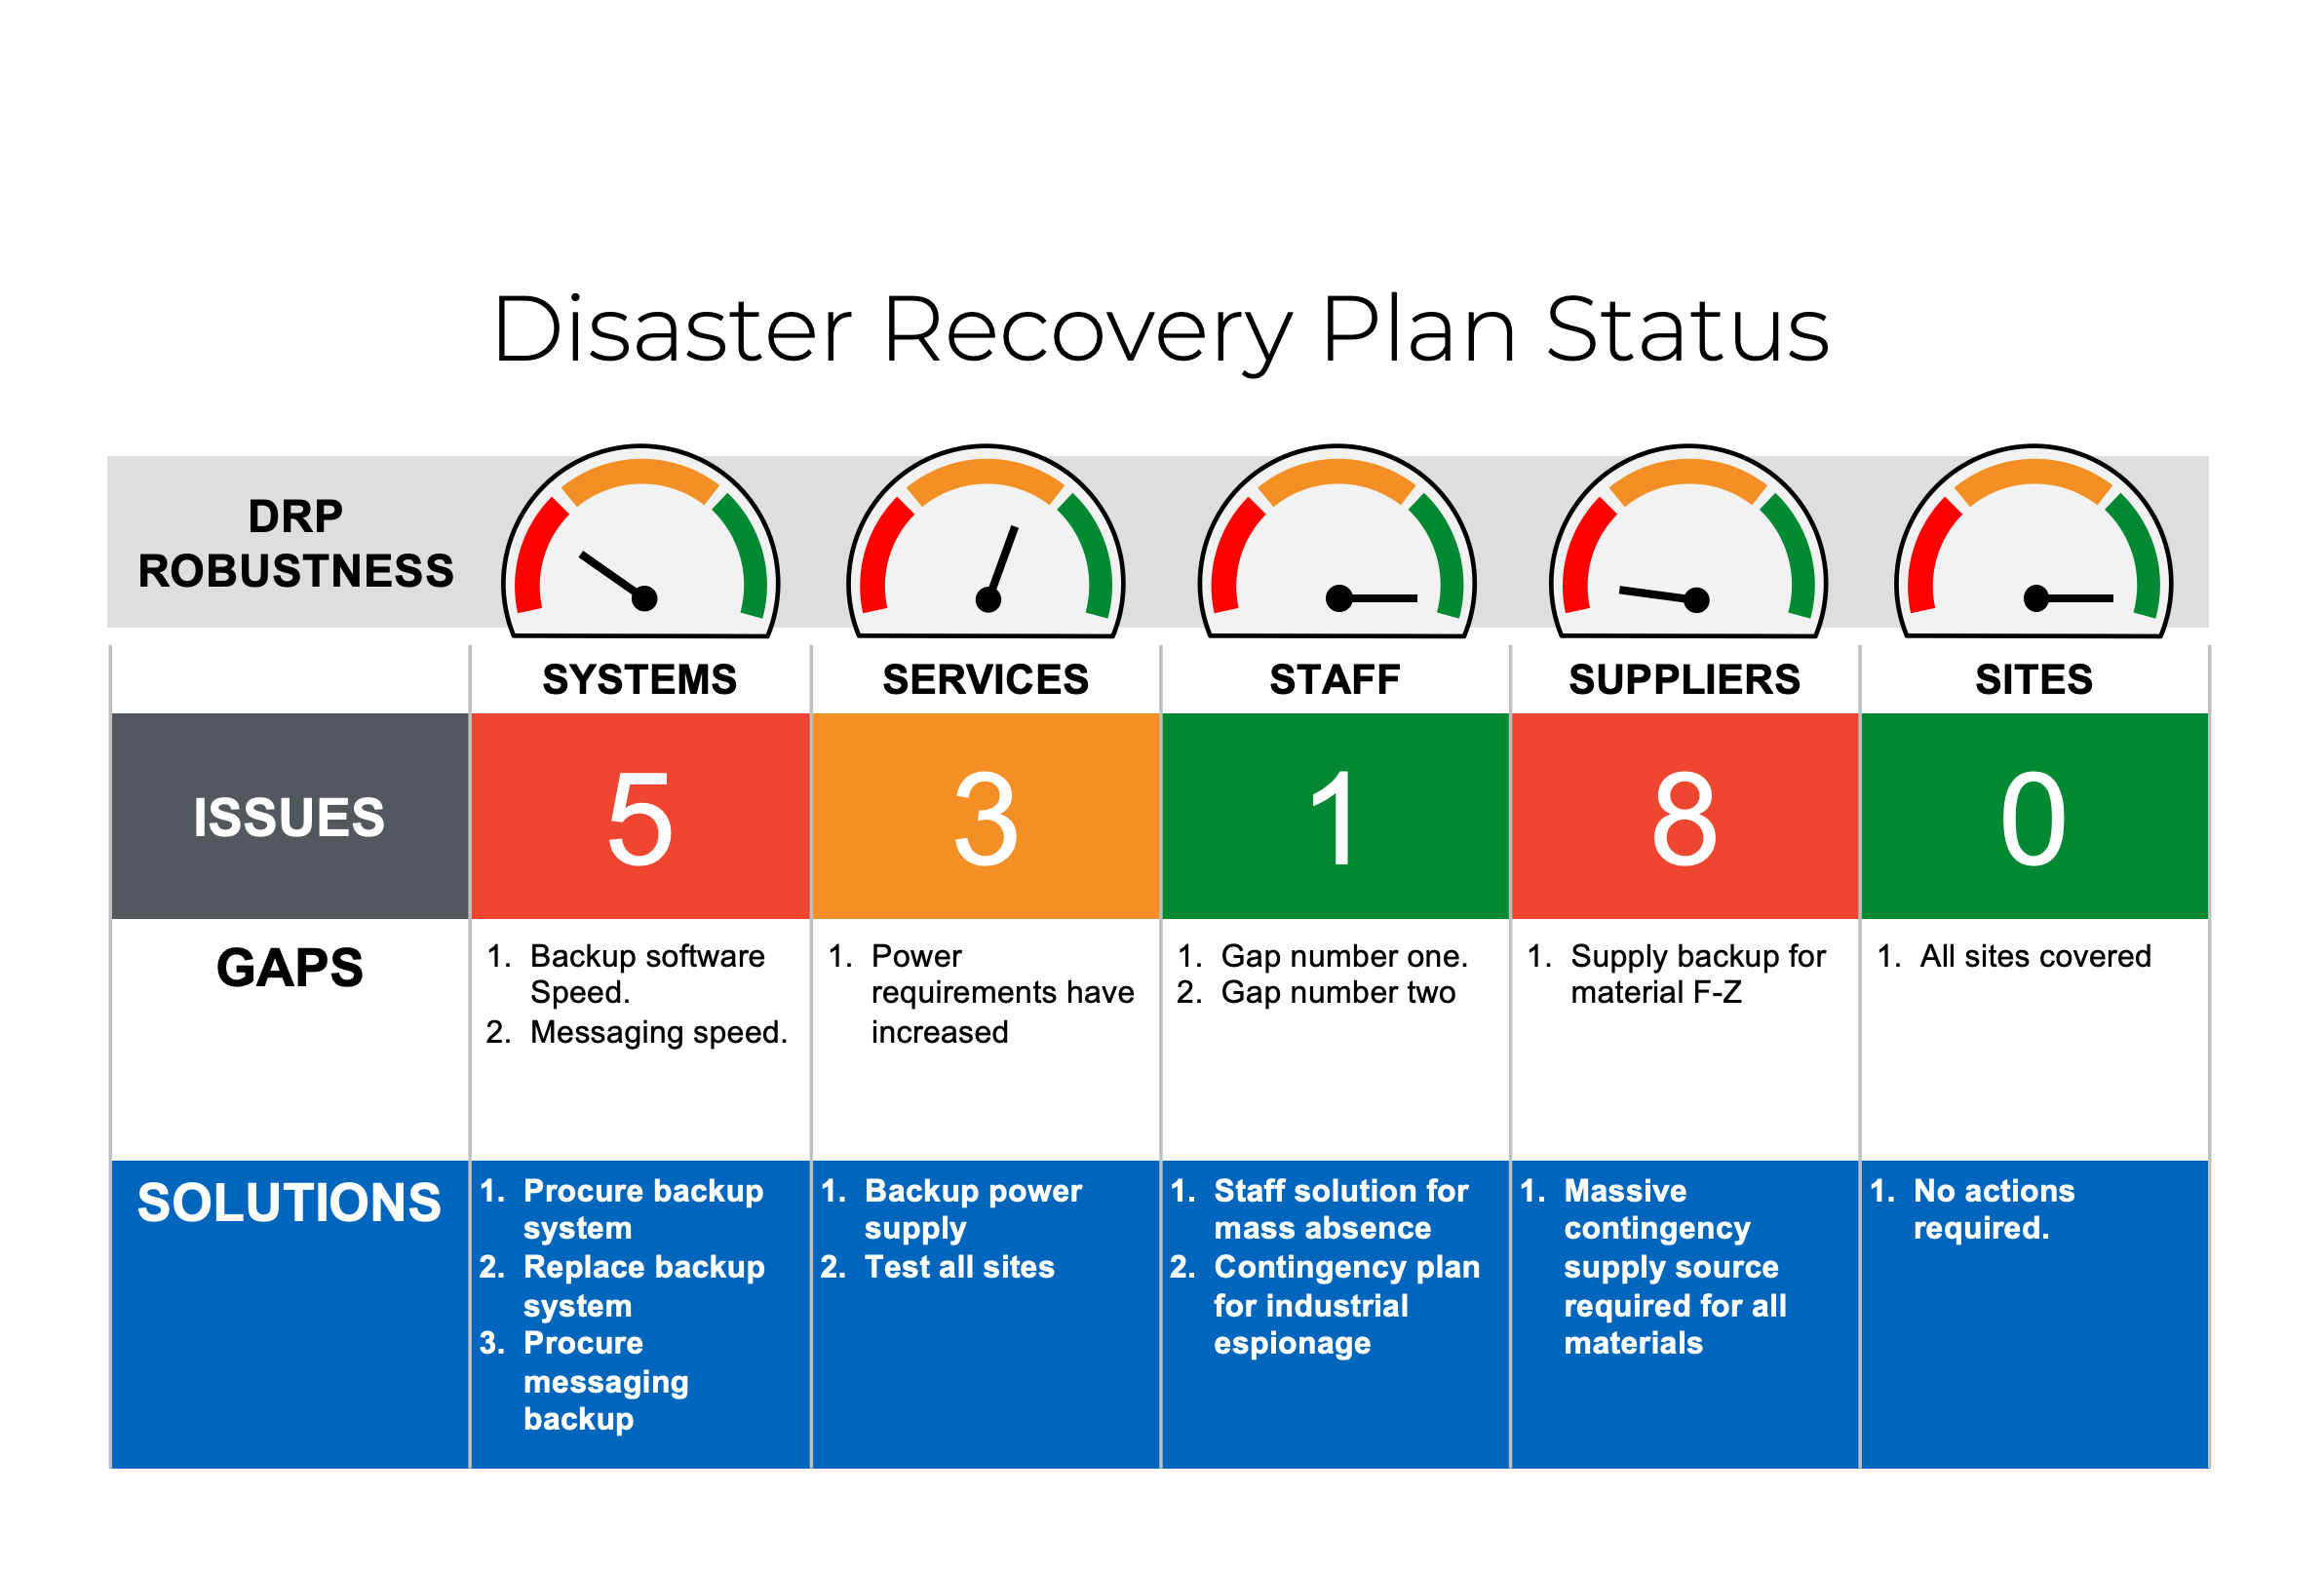 disaster recovery plan business impact analysis